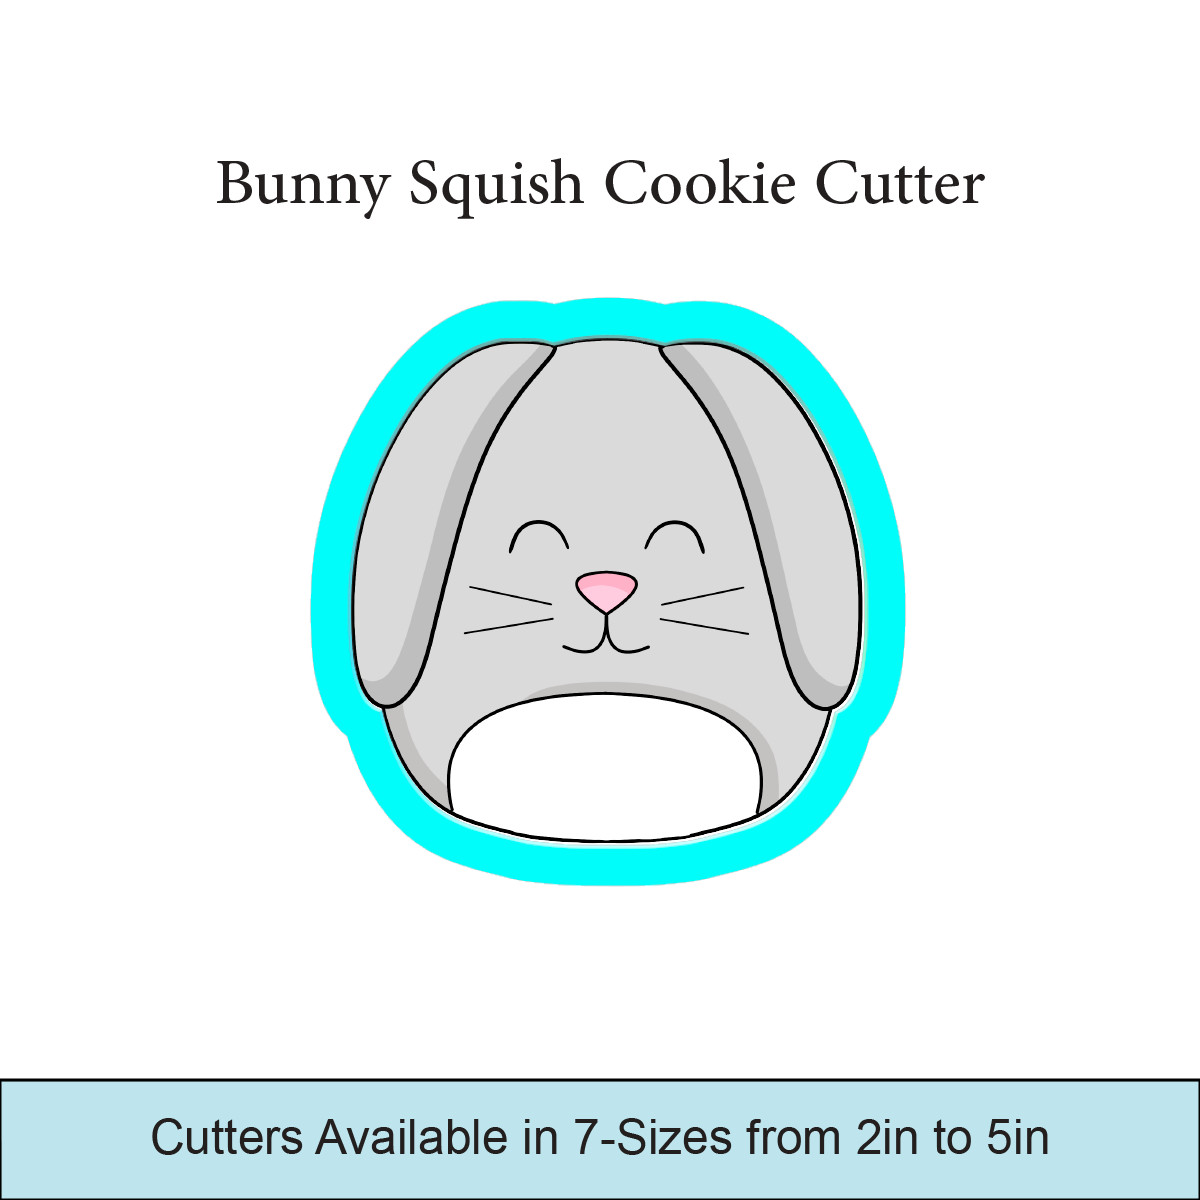 Bunny Squish Cookie Cutters